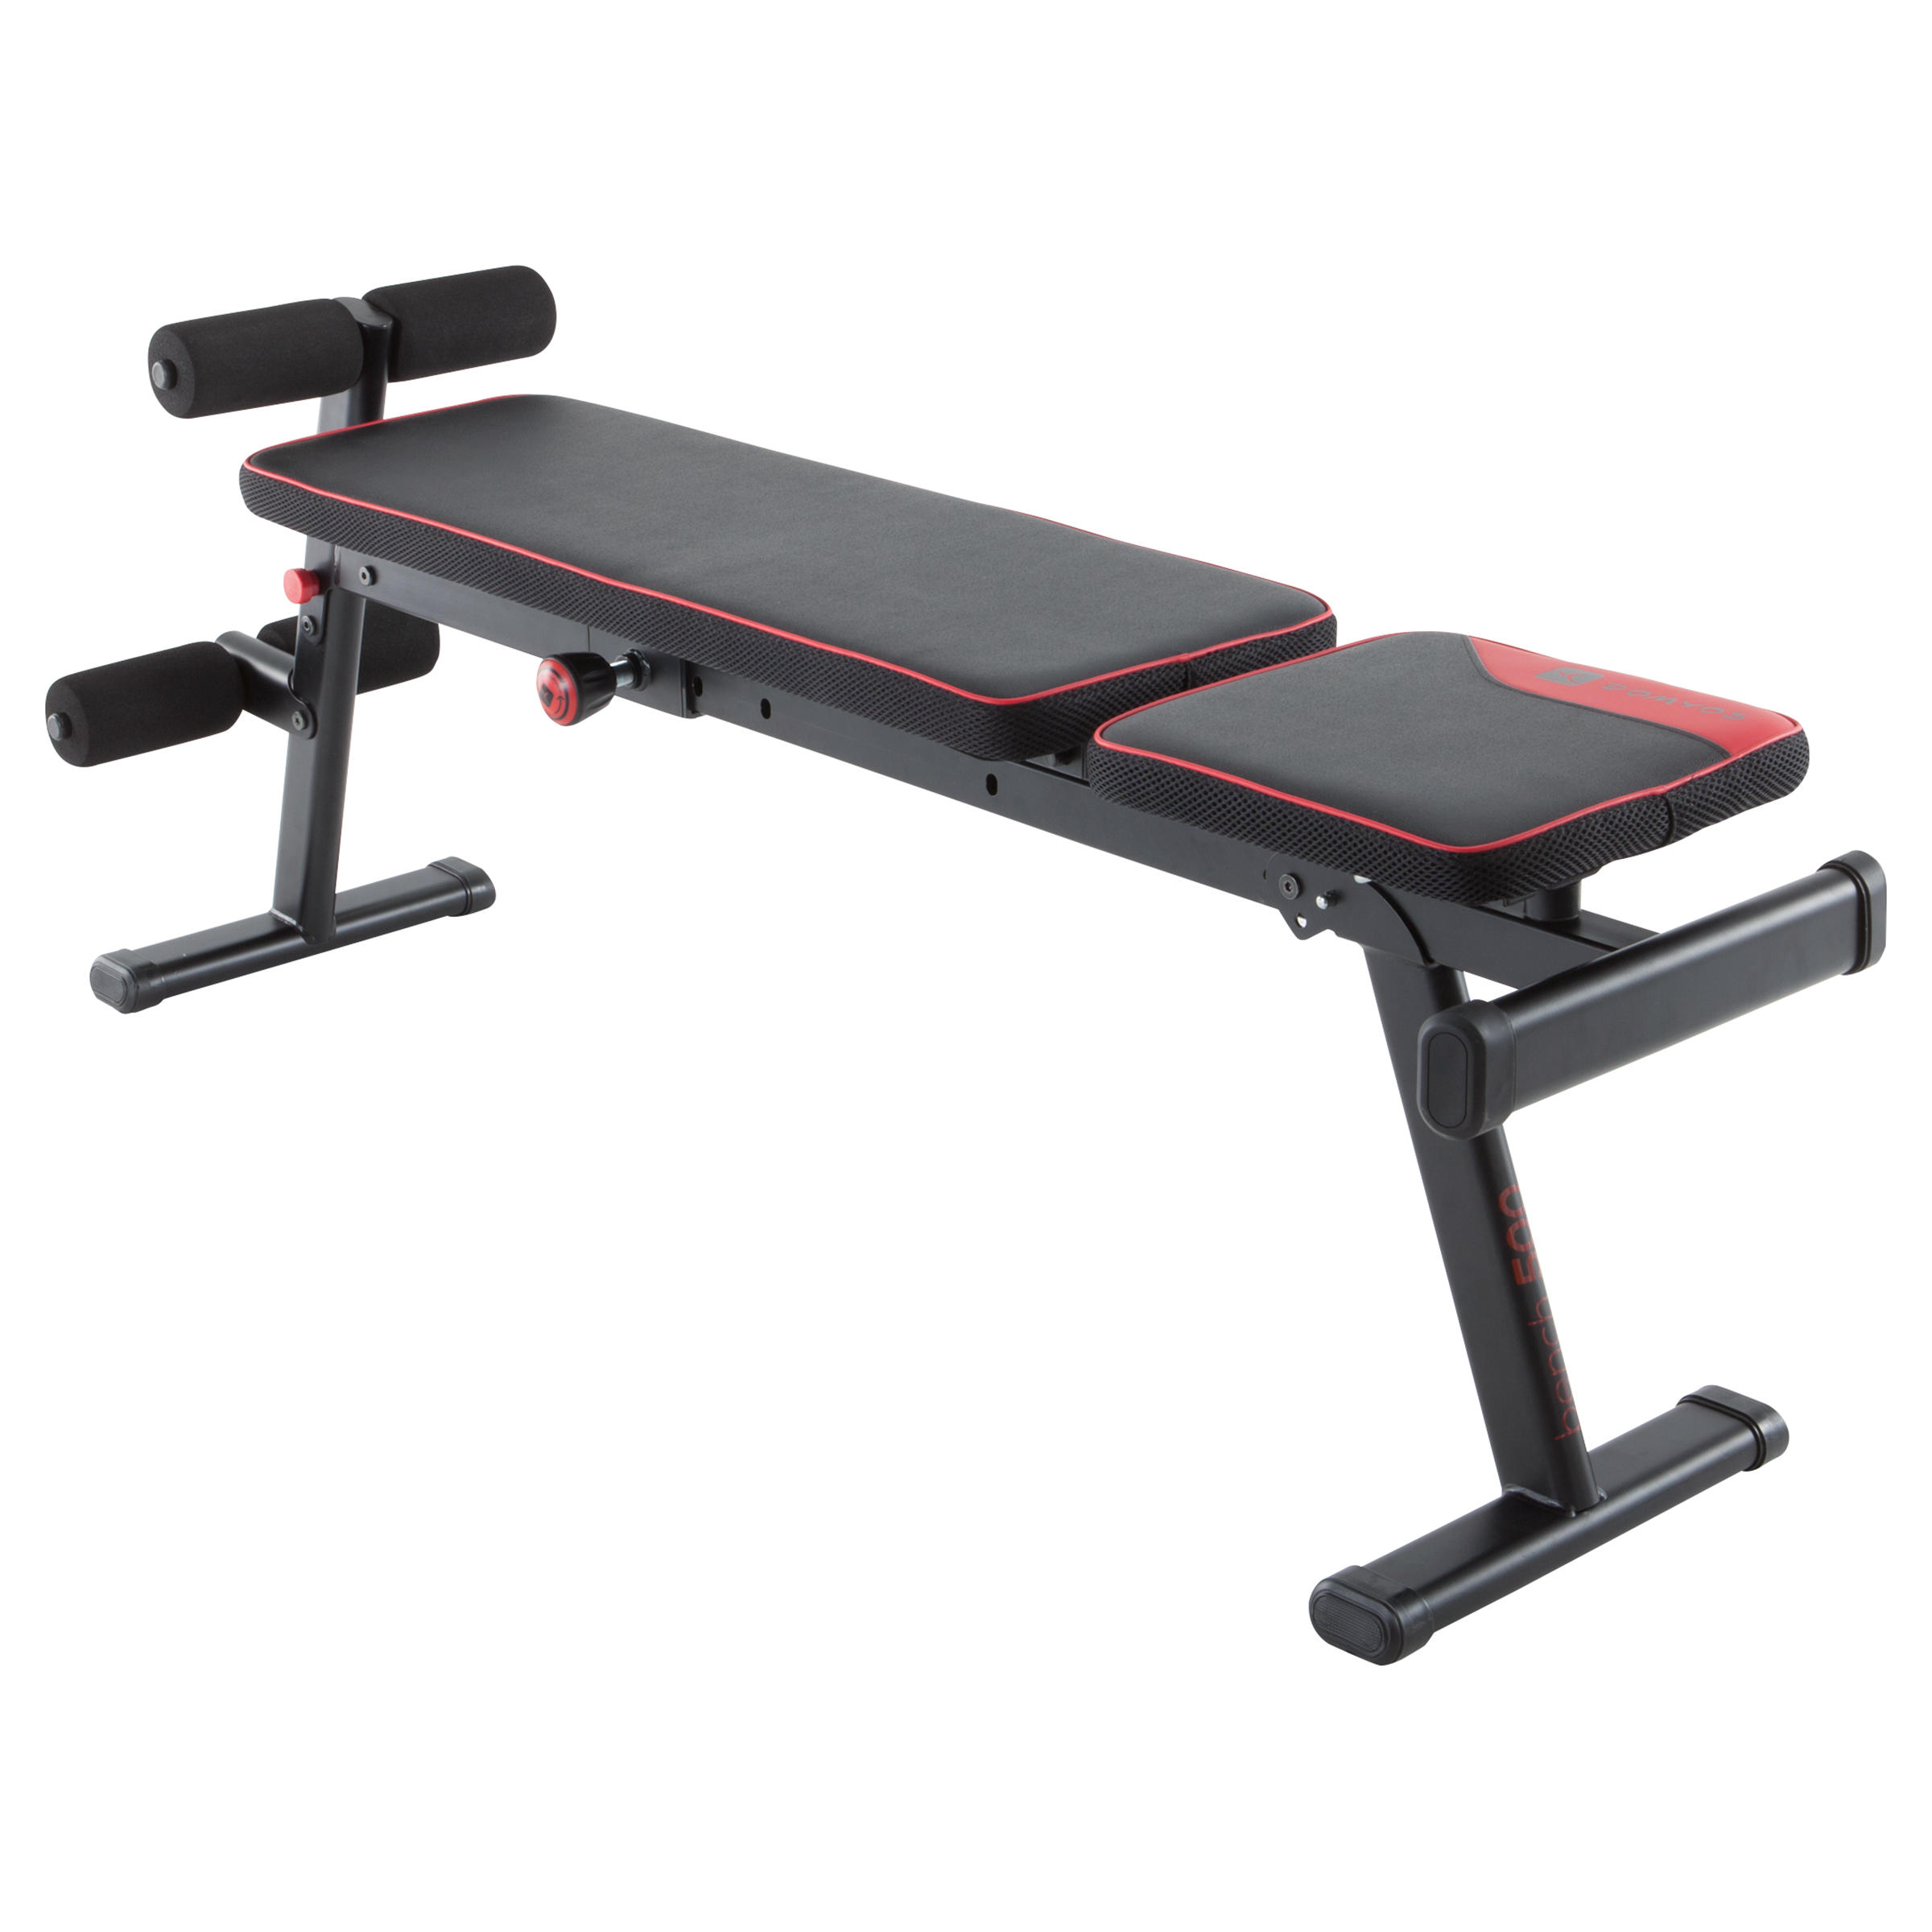 Gym Bench - Buy Gym and Workout Bench 